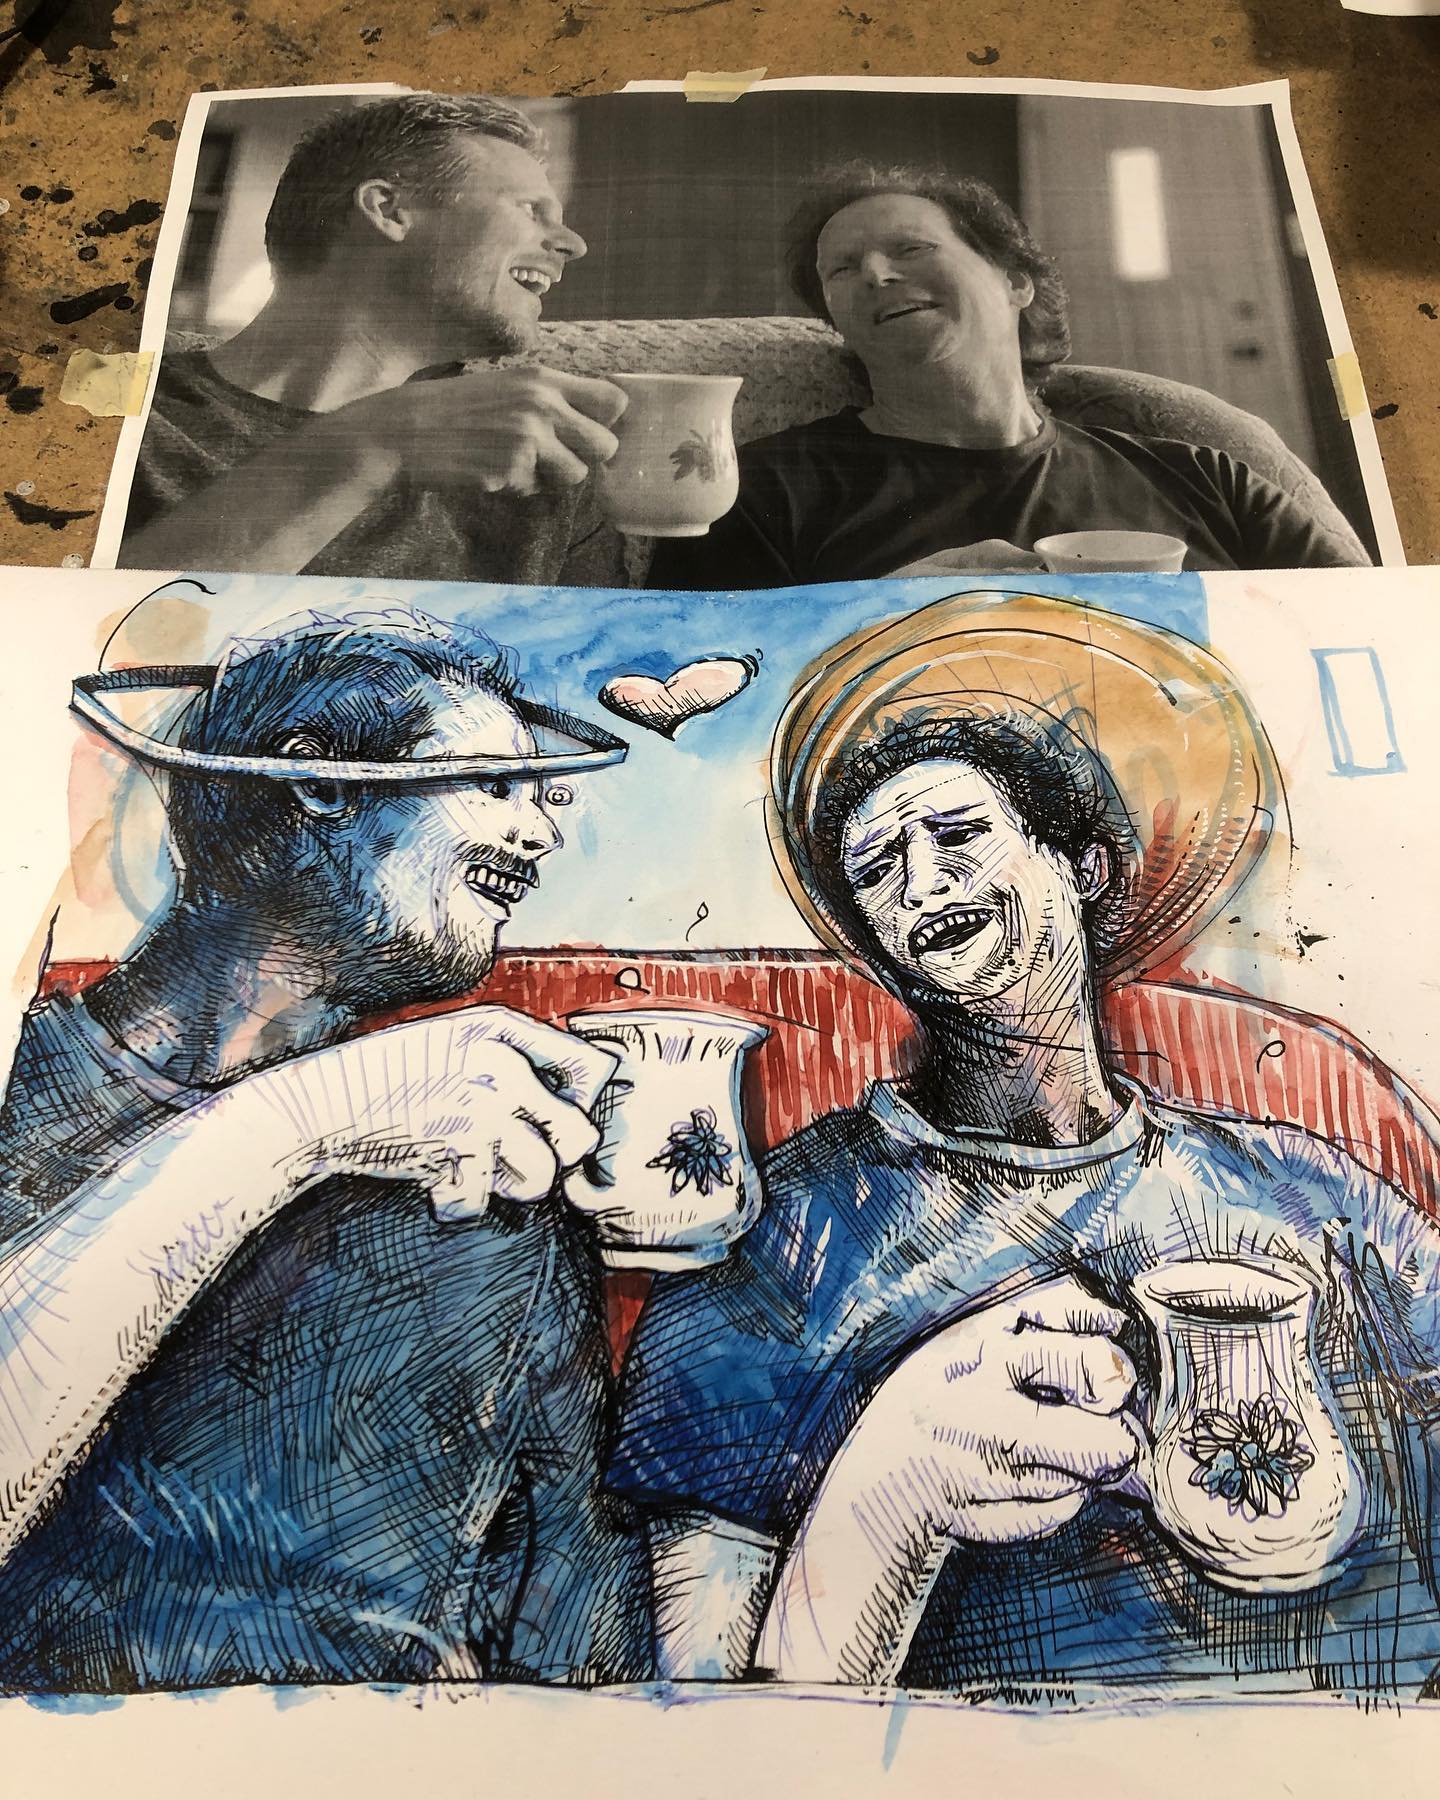 Watercolor and ink drawing of the two members of the Gush band Norwegian Soft Kitten enjoying some tea and laughing heartily